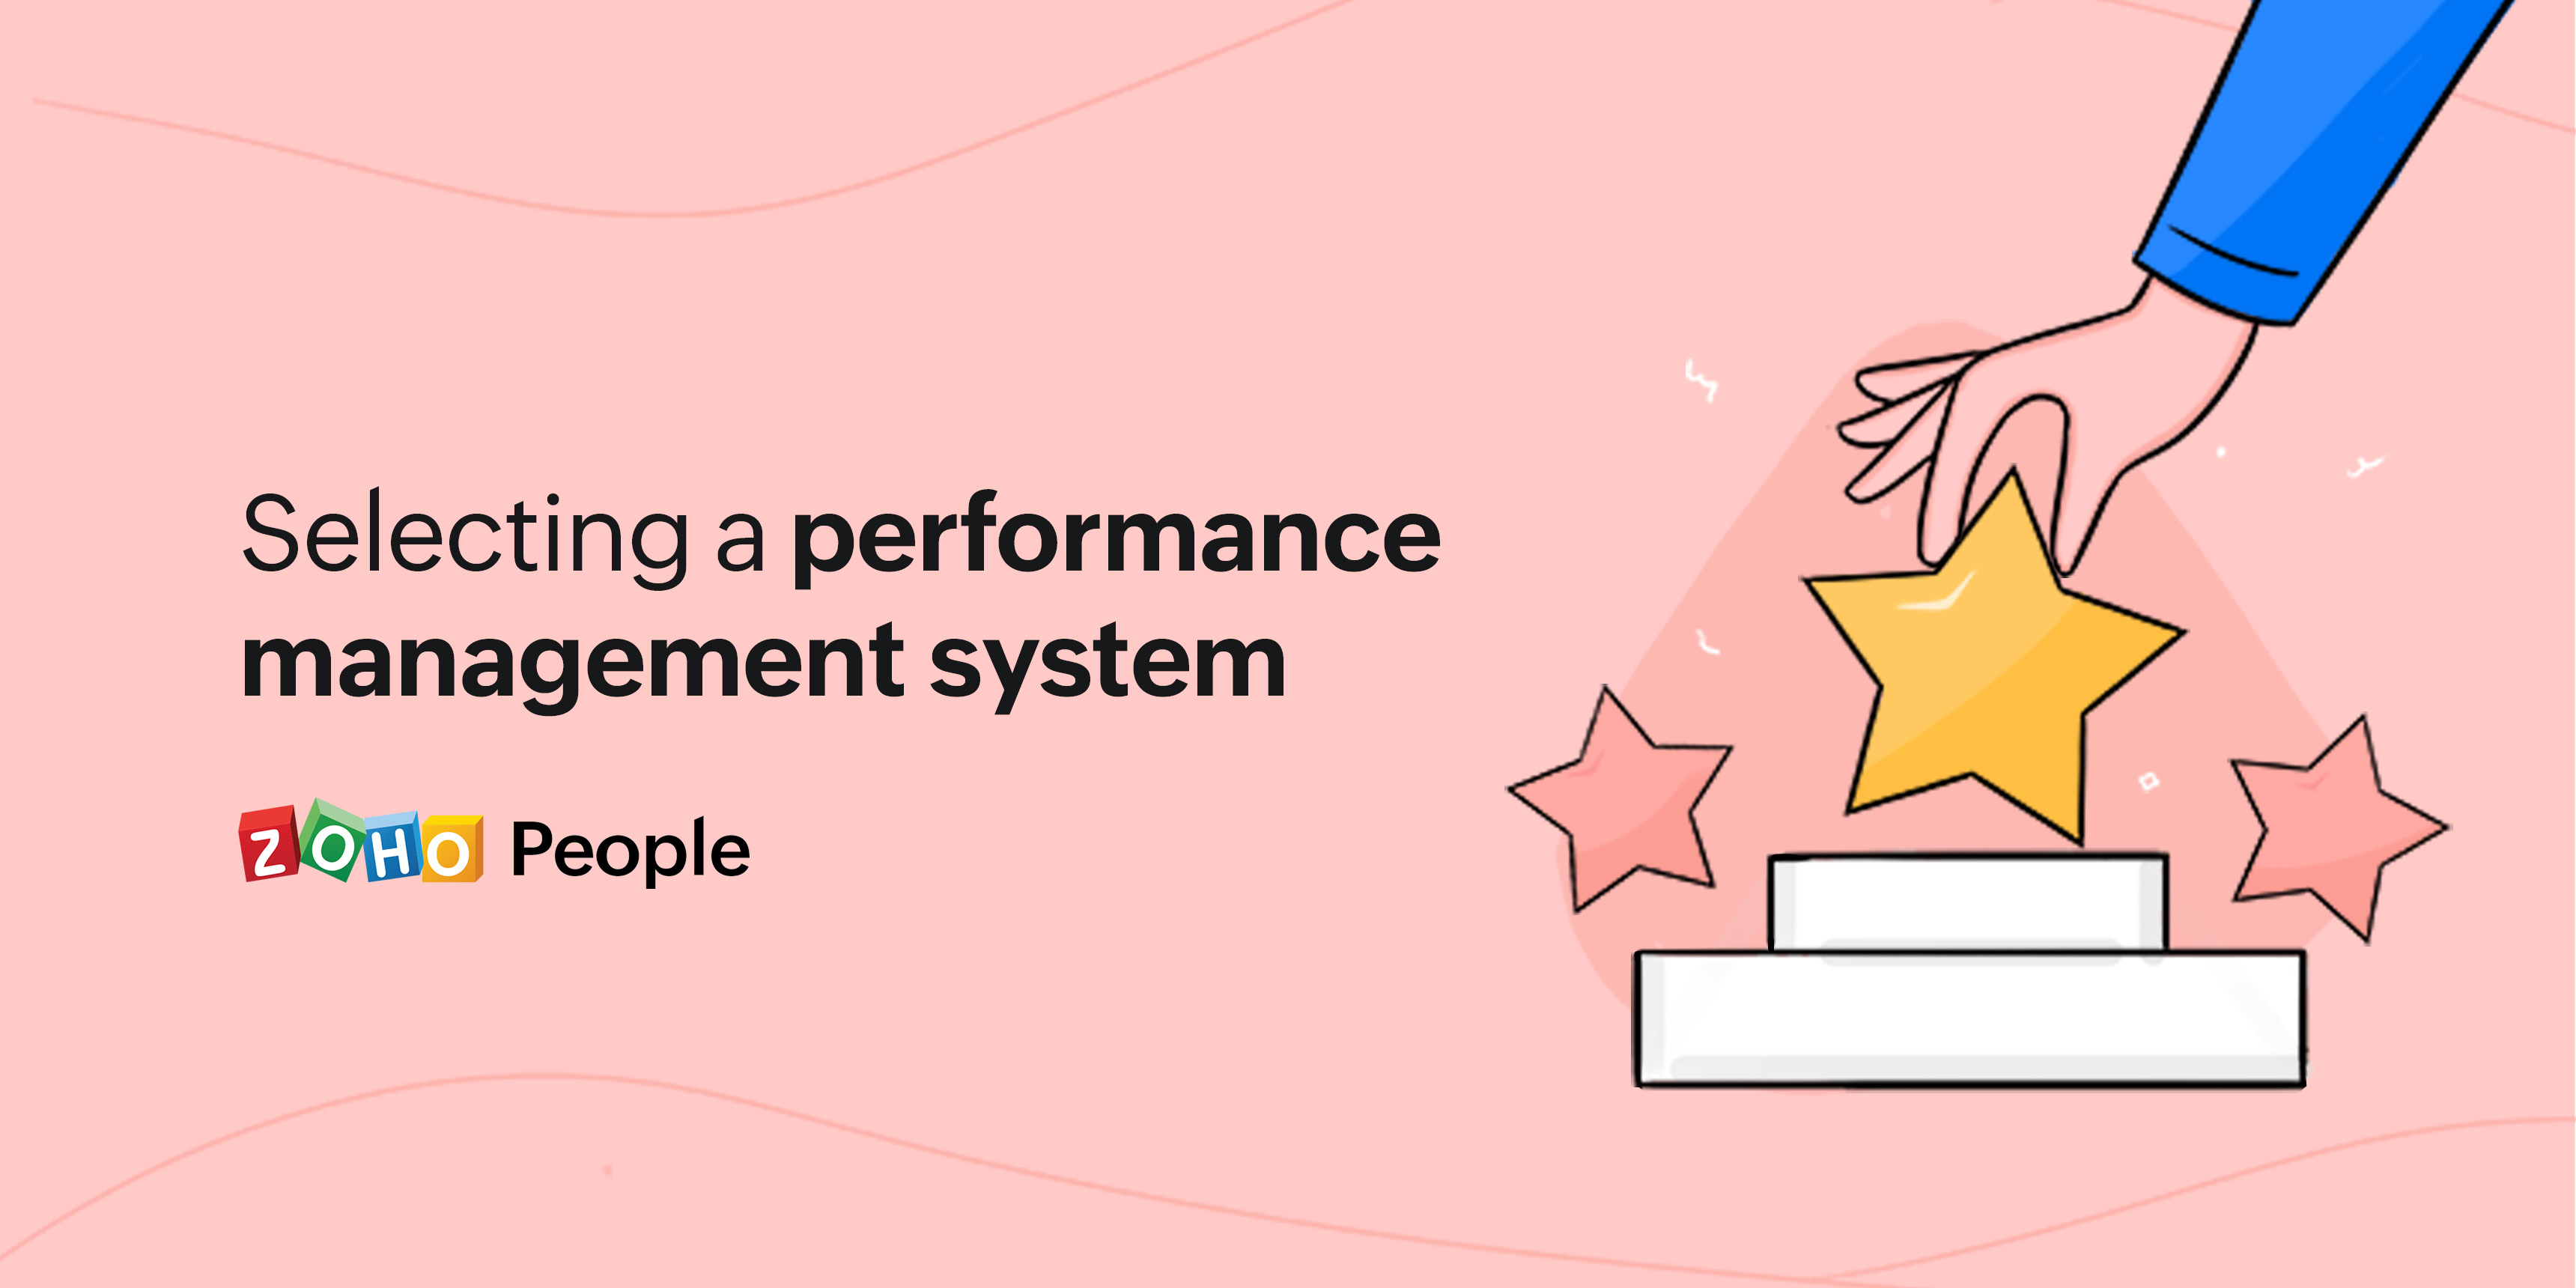 HR tech basics: 5 steps to choose the right performance management system for your organization